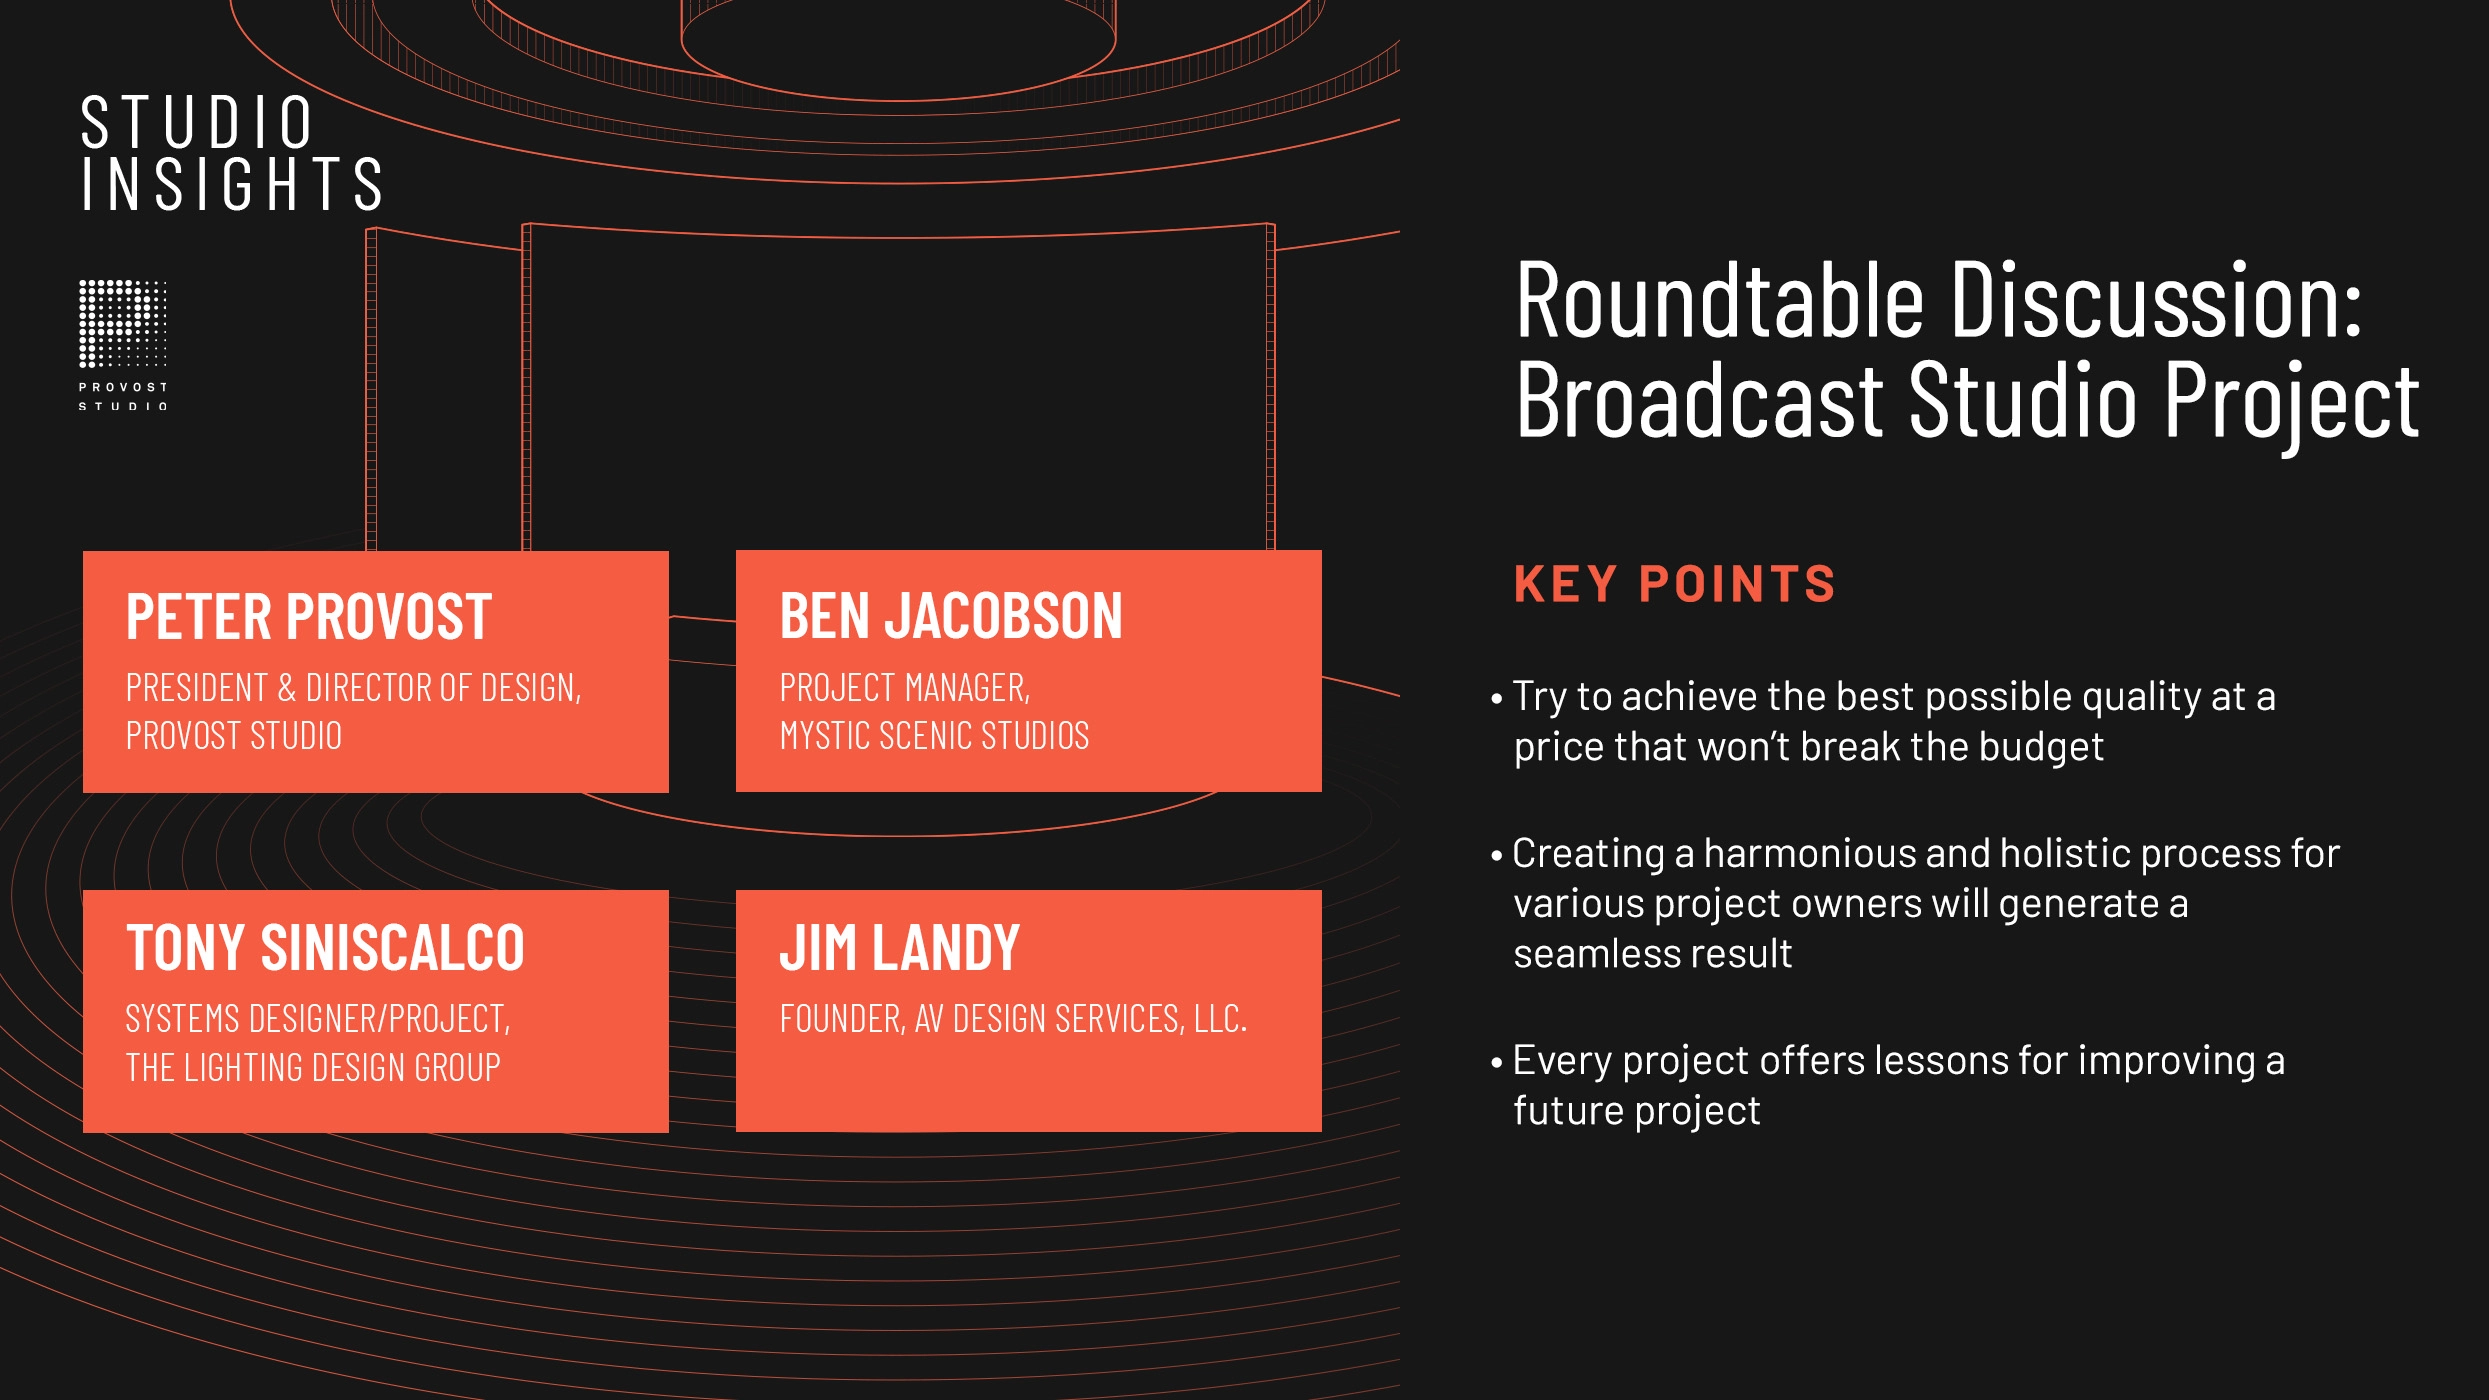 Roundtable Discussion: Broadcast Studio Project for FOX 5 DC